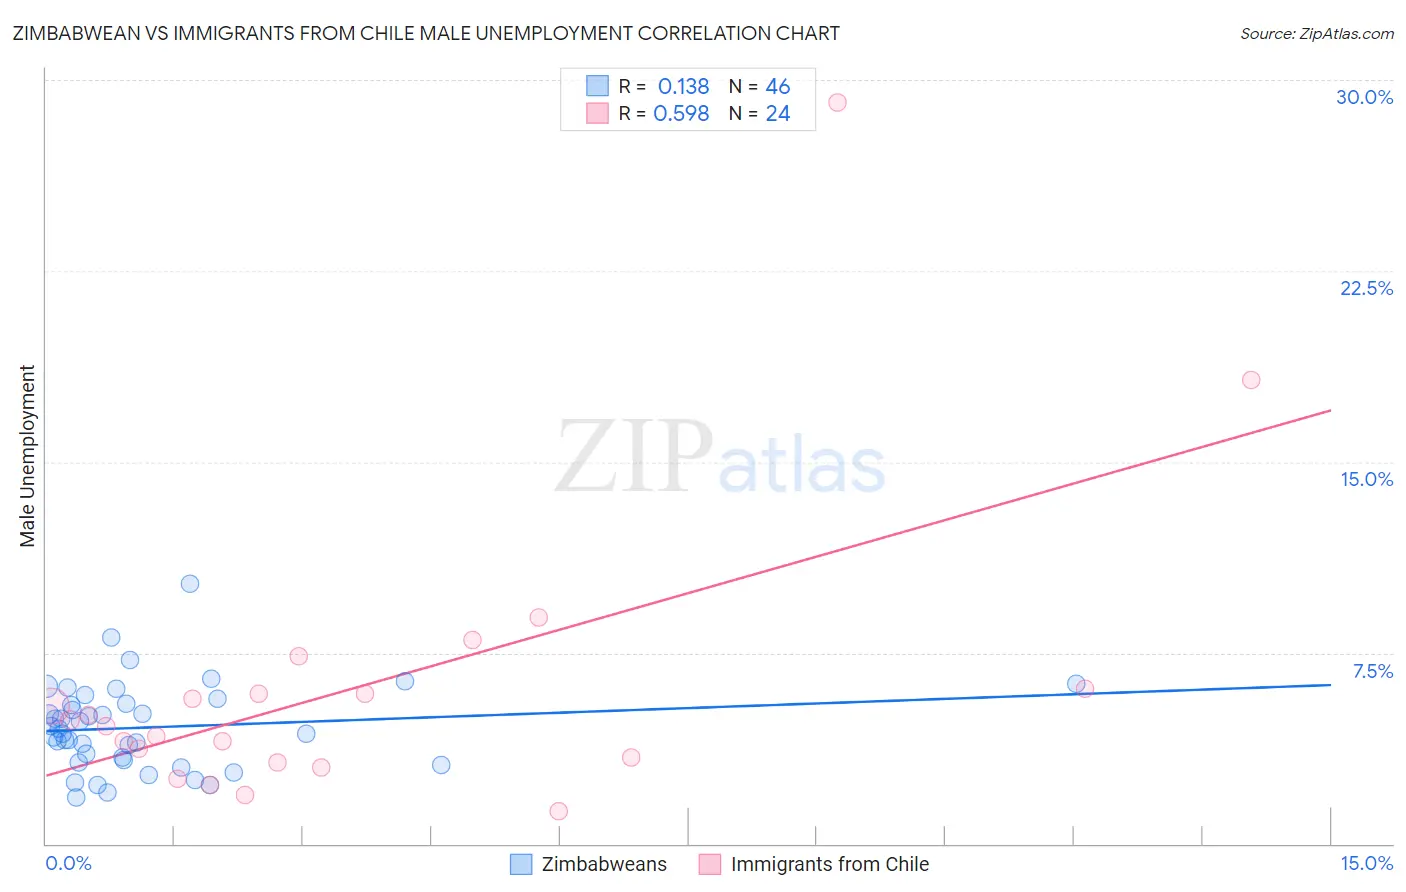 Zimbabwean vs Immigrants from Chile Male Unemployment